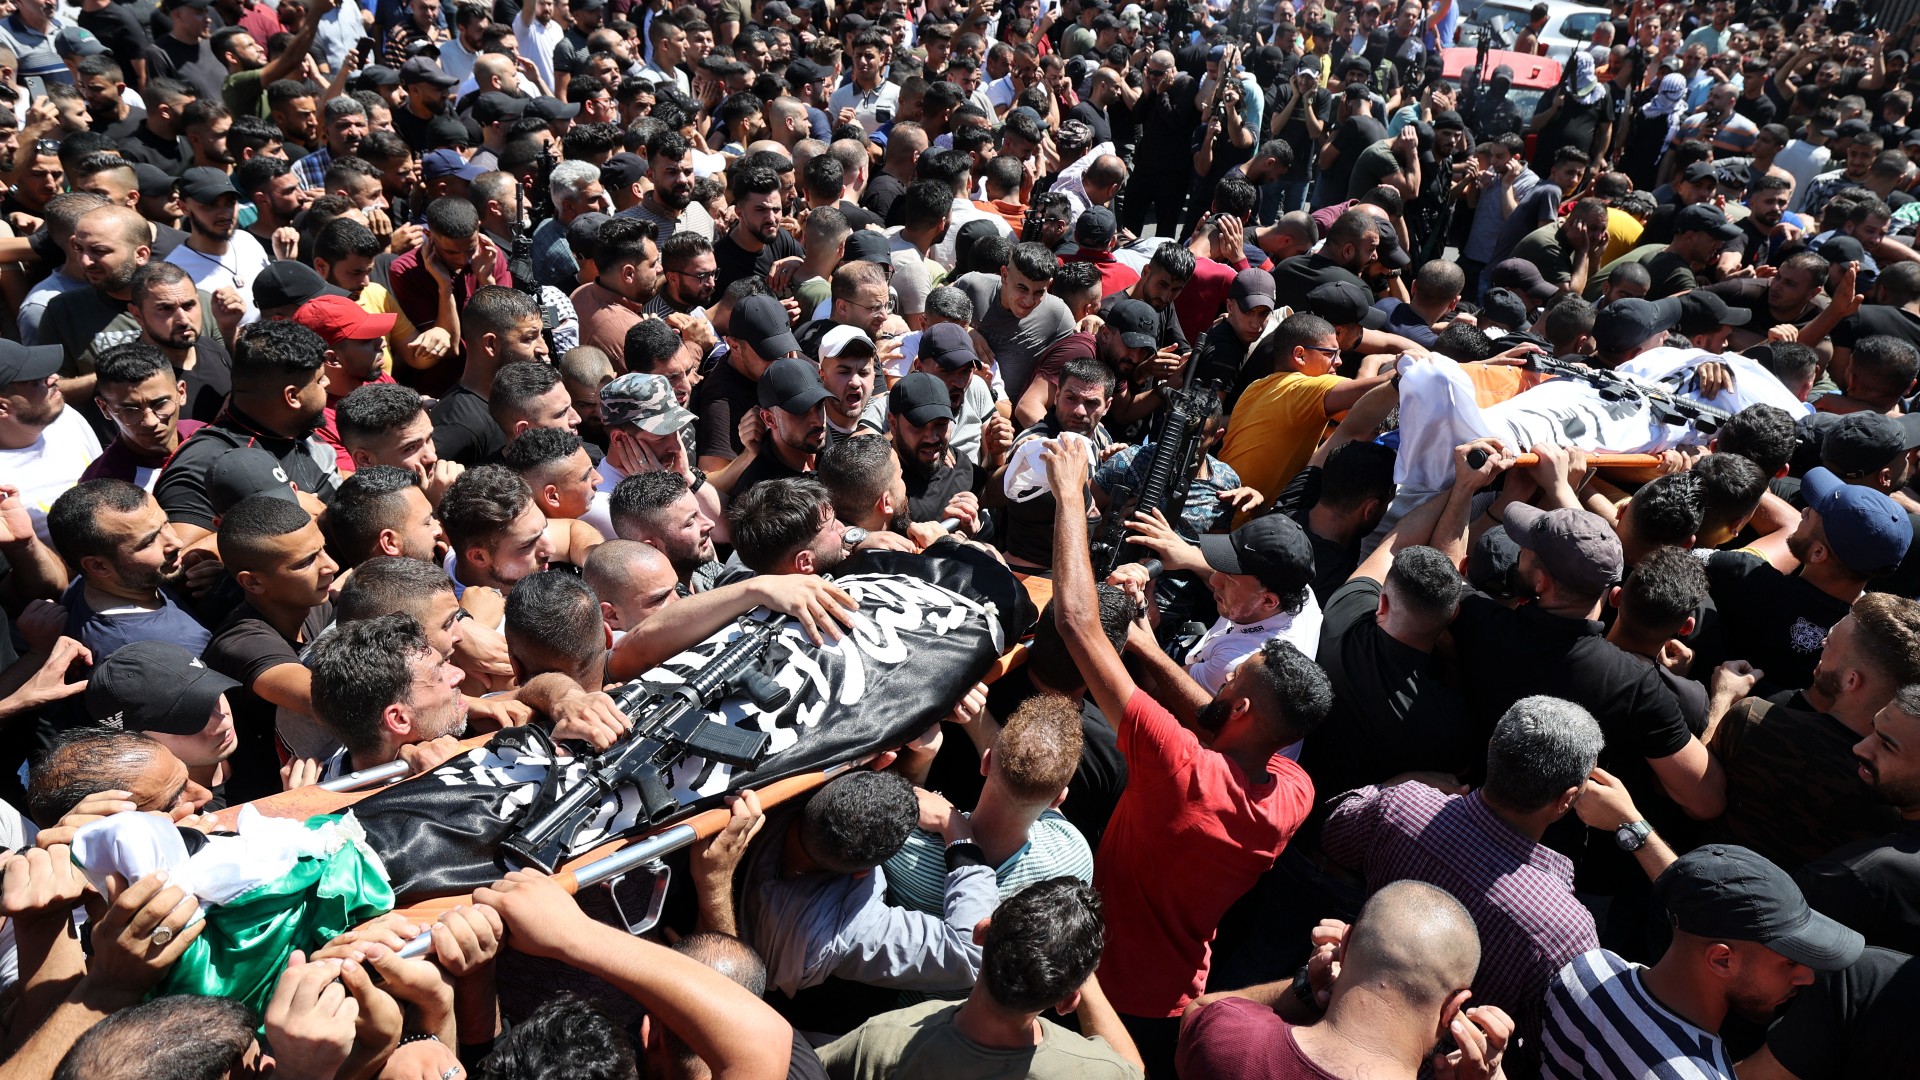 Mourners carry the body of one of two Palestinians killed earlier in confrontations with Israeli troops in the old quarter of the West Bank city of Nablus, during their funeral procession in the same city, on July 24, 2022